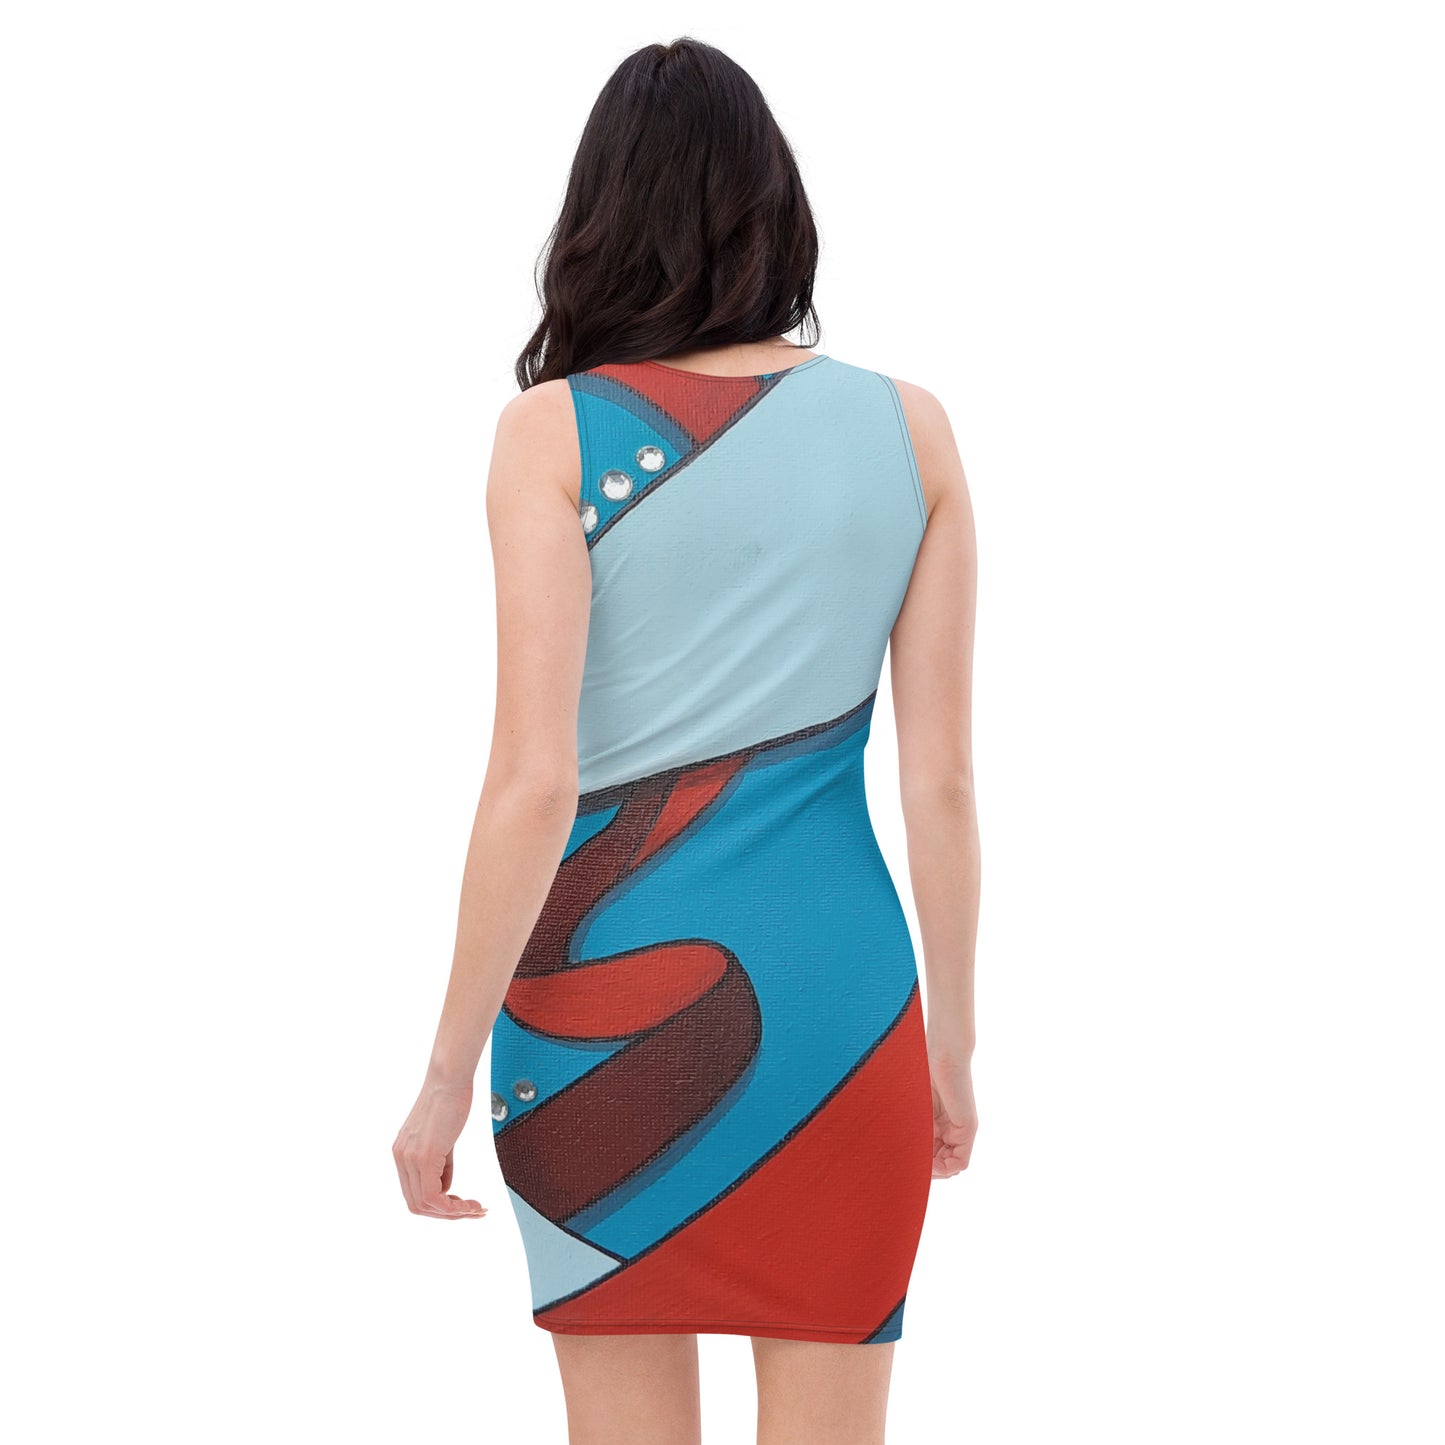 "Conflicting Dimensions" Fitted Dress